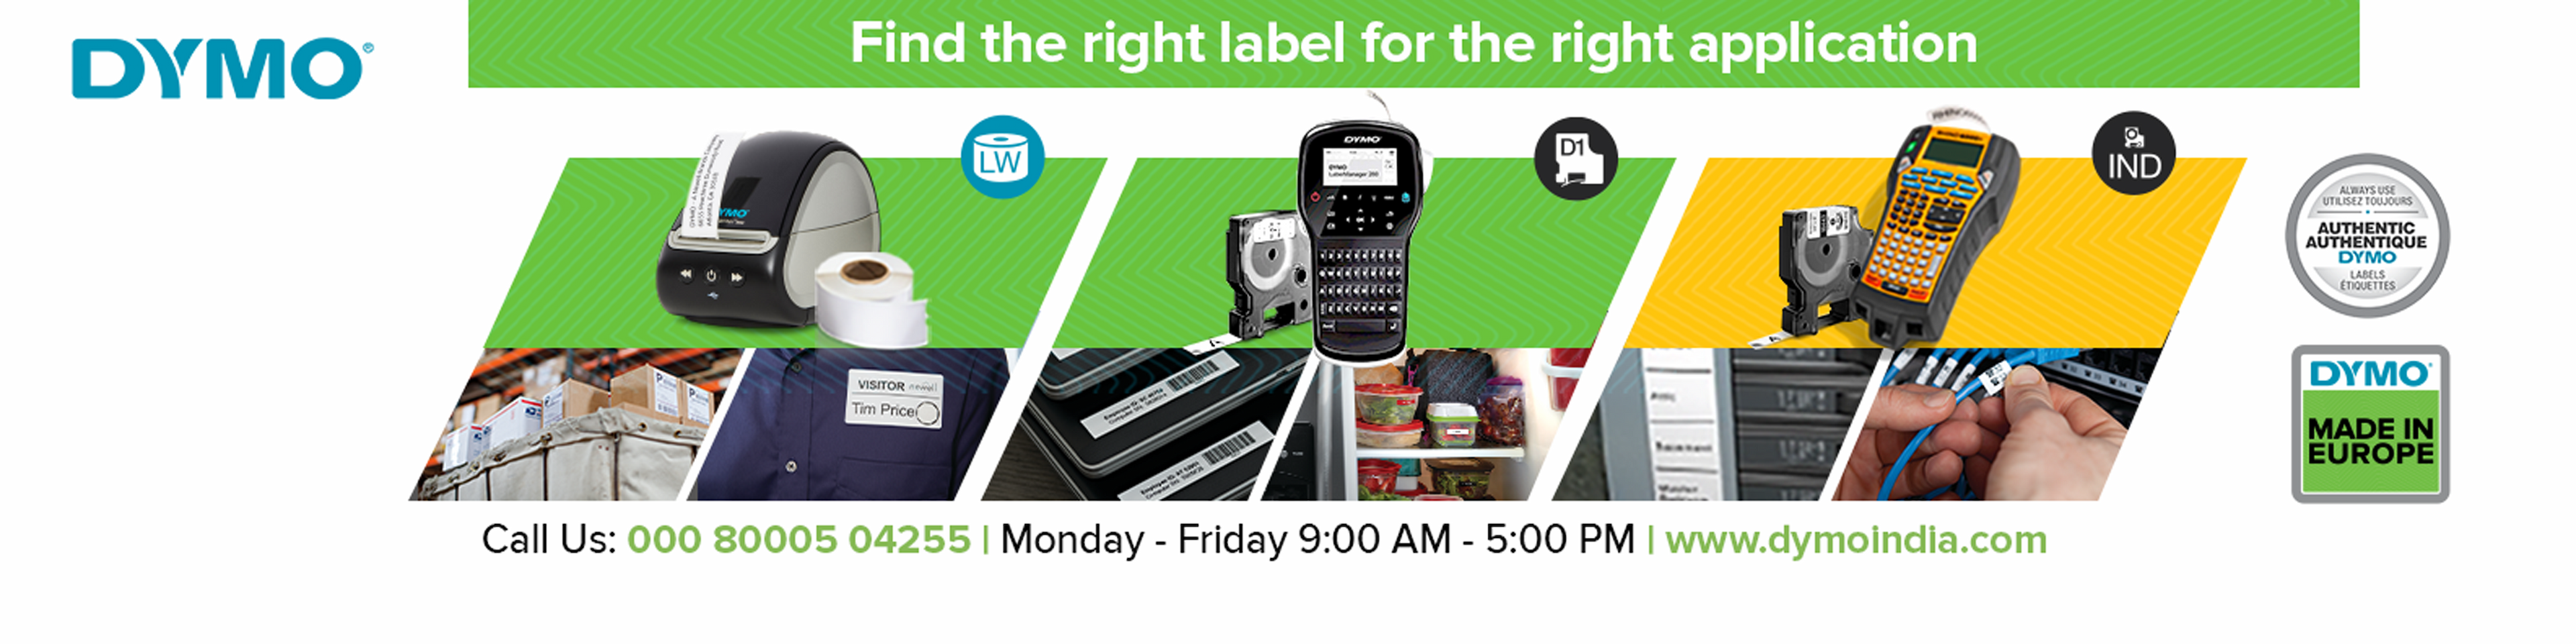 Dymo India | Find The Right Label For The Right Application